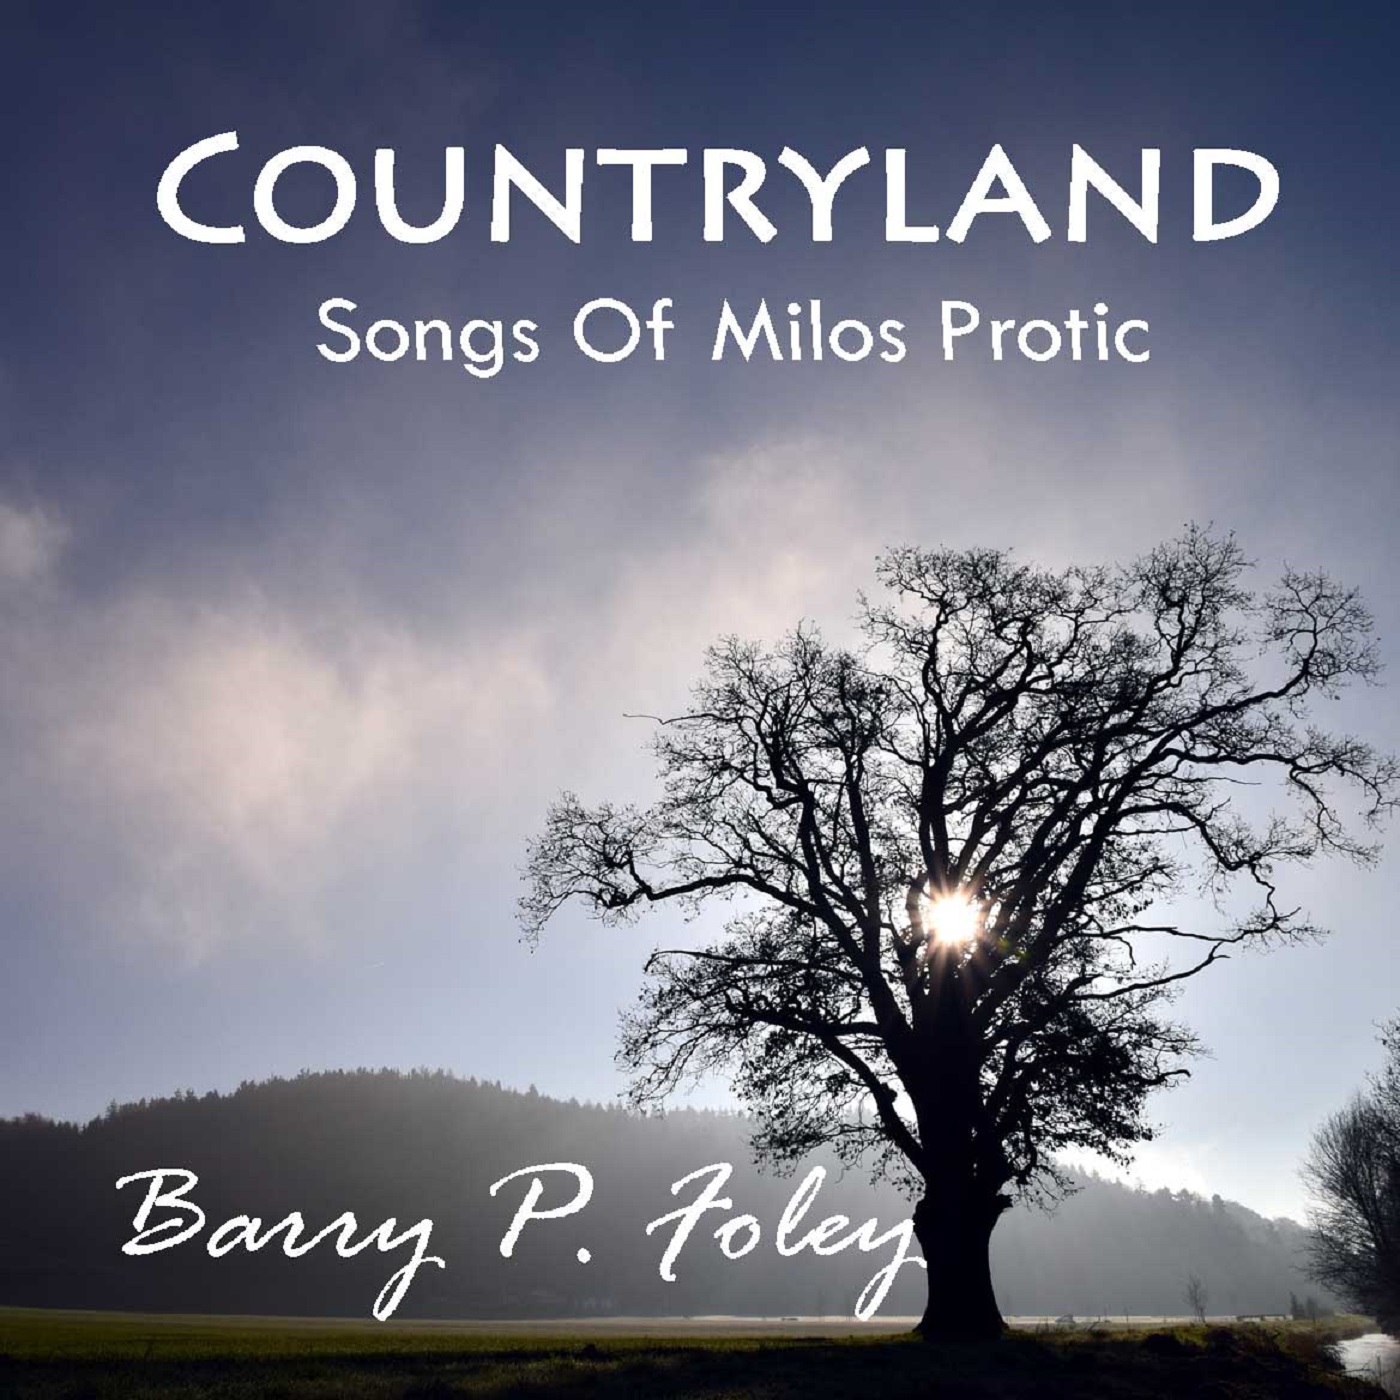 Countryland Cover2b copy